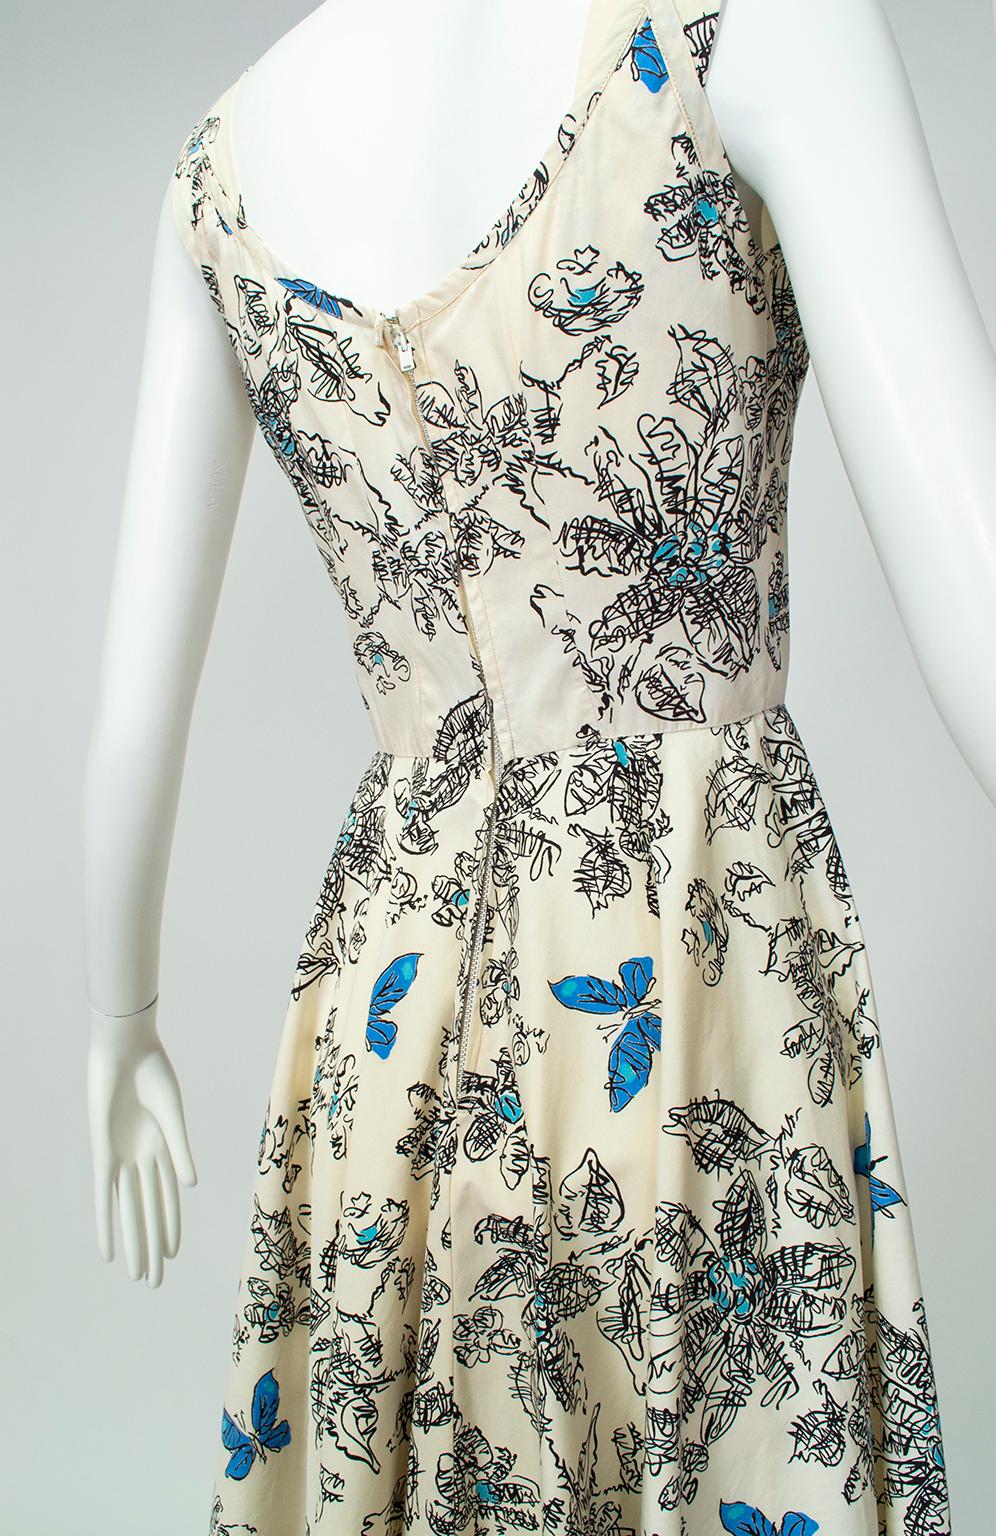 Blue Butterfly Sketch New Look Ballerina Sundress with Bib Points - XS, 1950s In Good Condition For Sale In Tucson, AZ